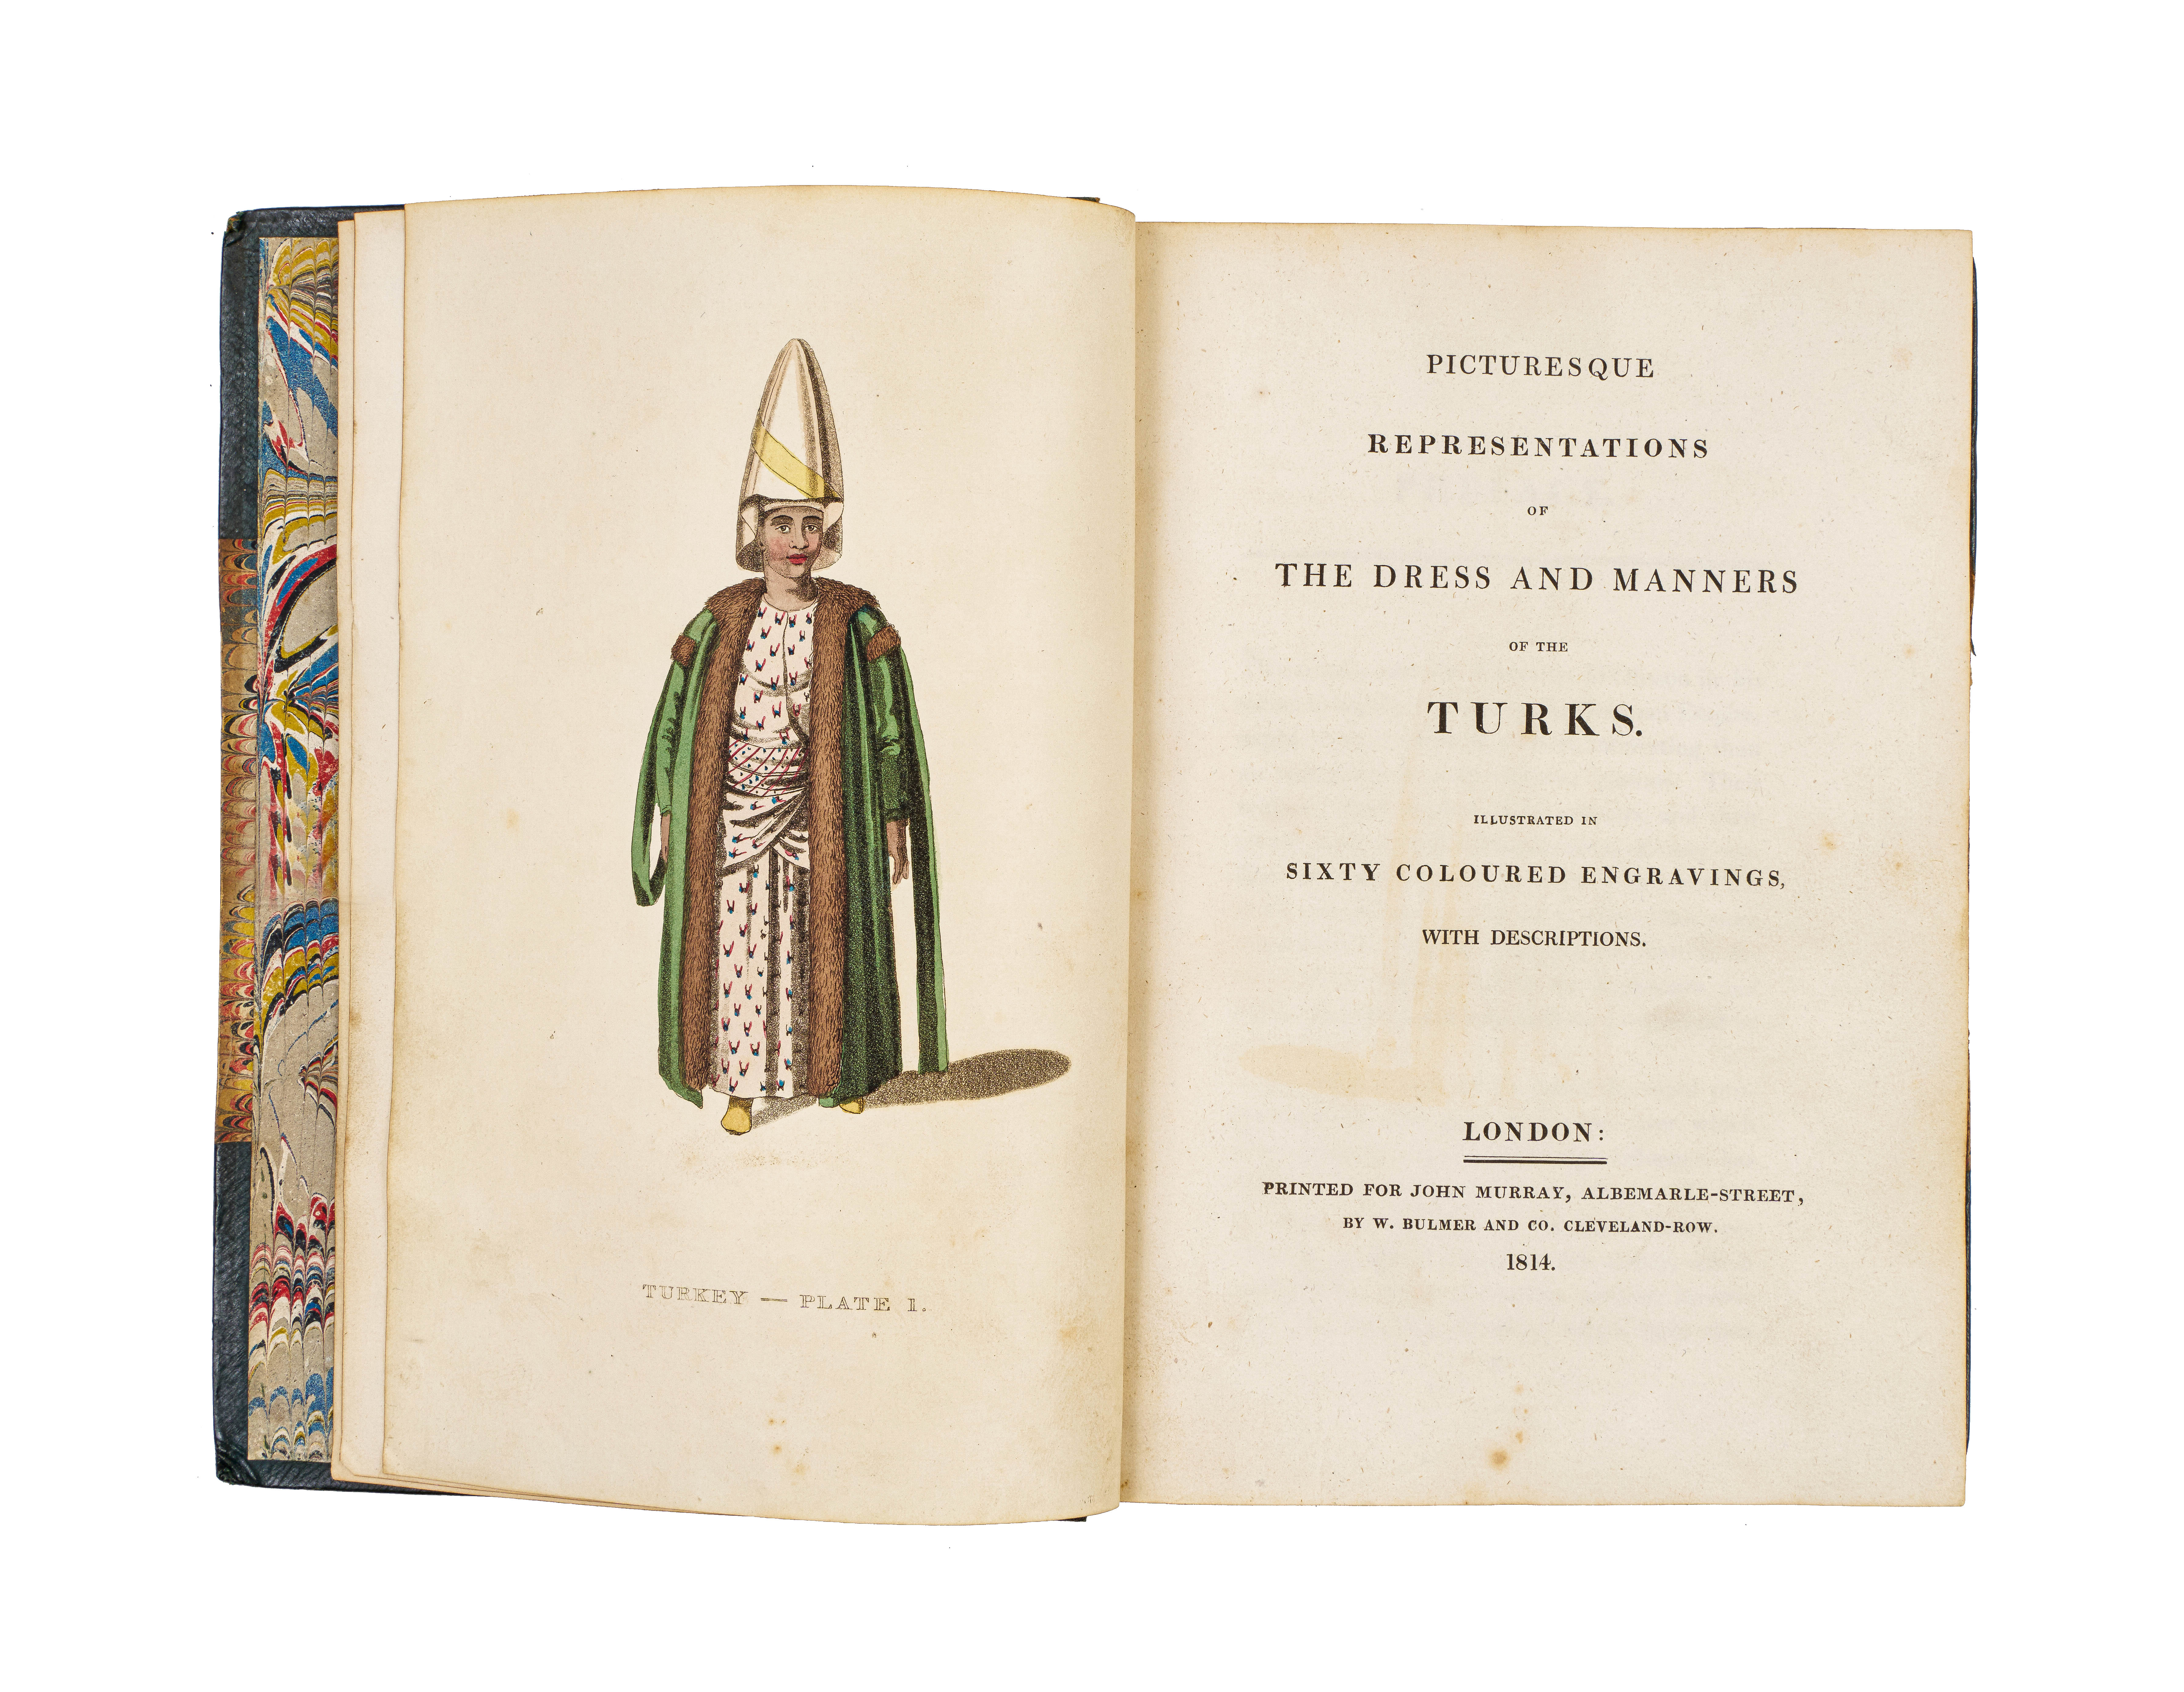 COSTUMES TURKEY, PICTURESQUE REPRESENTATIONS OF THE DRESS AND MANNERS OF THE TURKS, JOHN MURRAY, LON